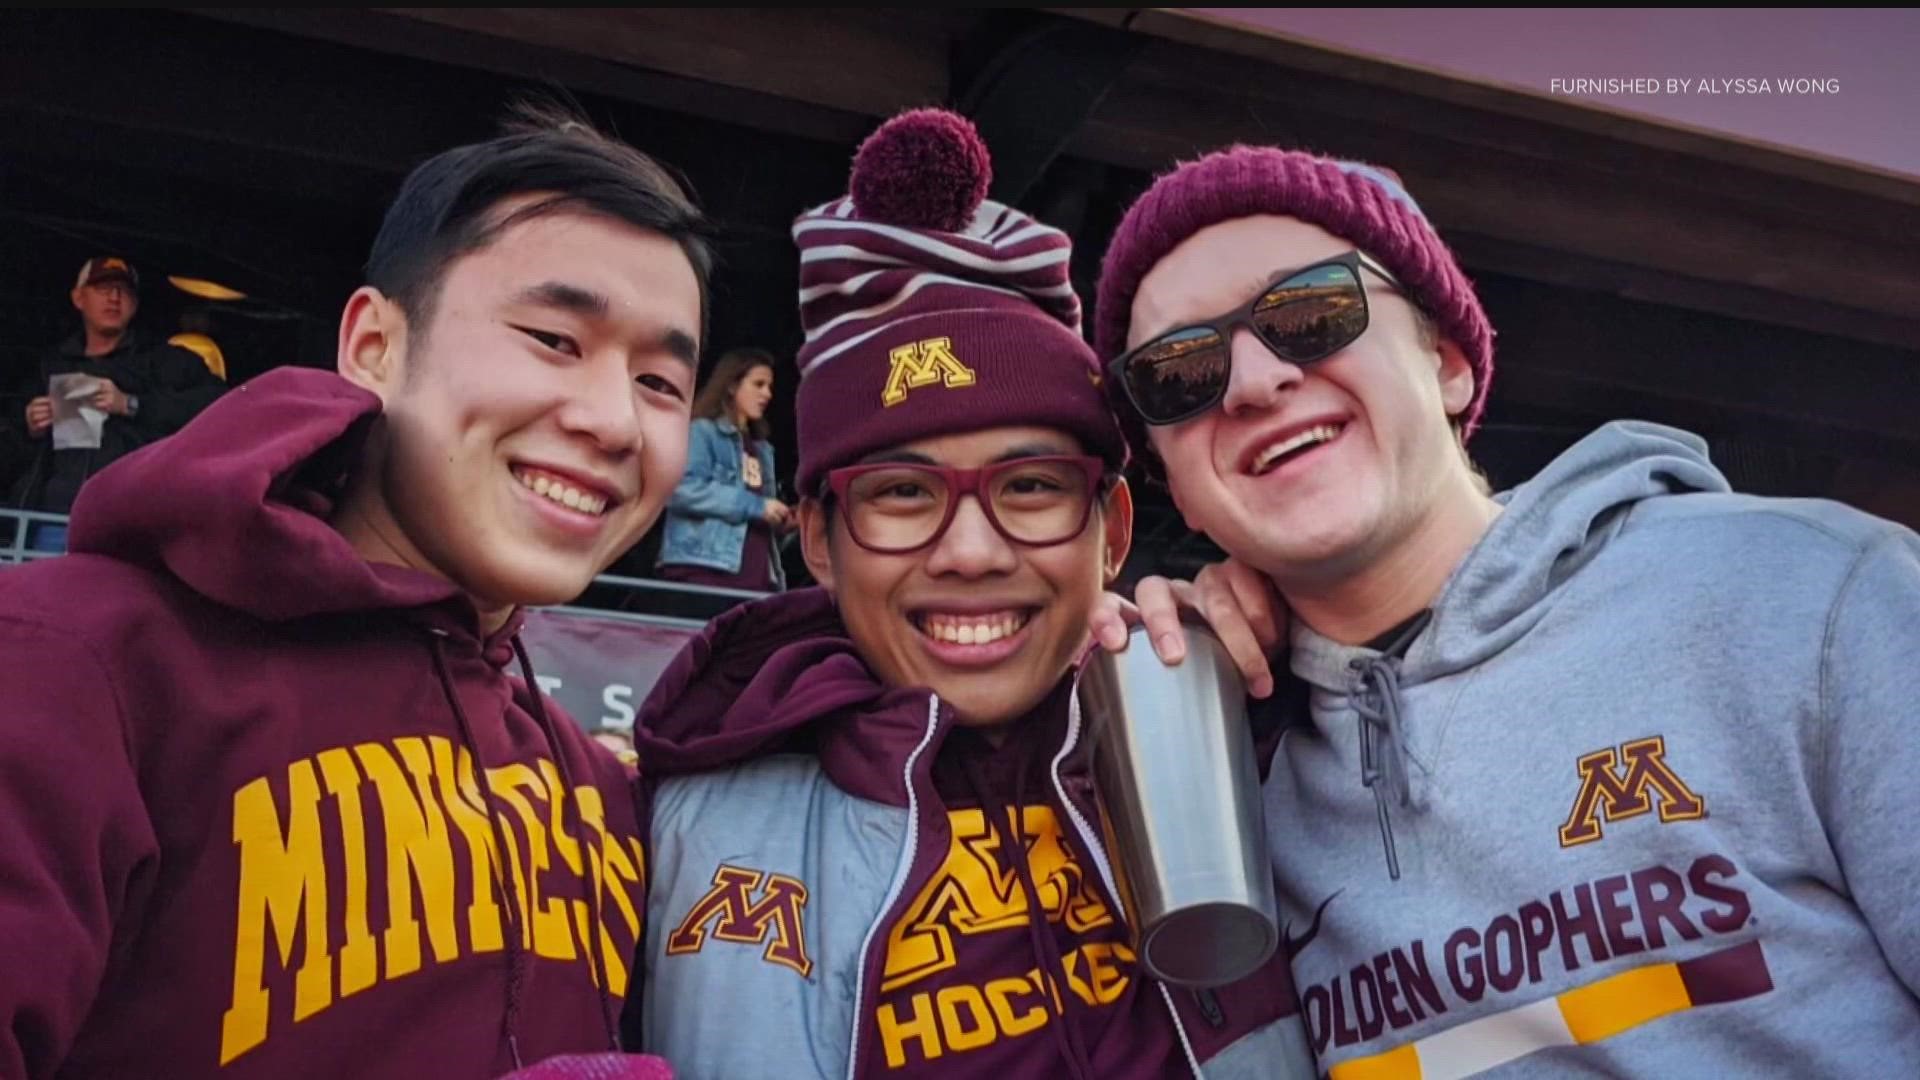 "We want him to wake up soon," Kyle Wong's father told KARE 11. The U of M student was seriously injured in a hit-and-run crash on Aug. 20.